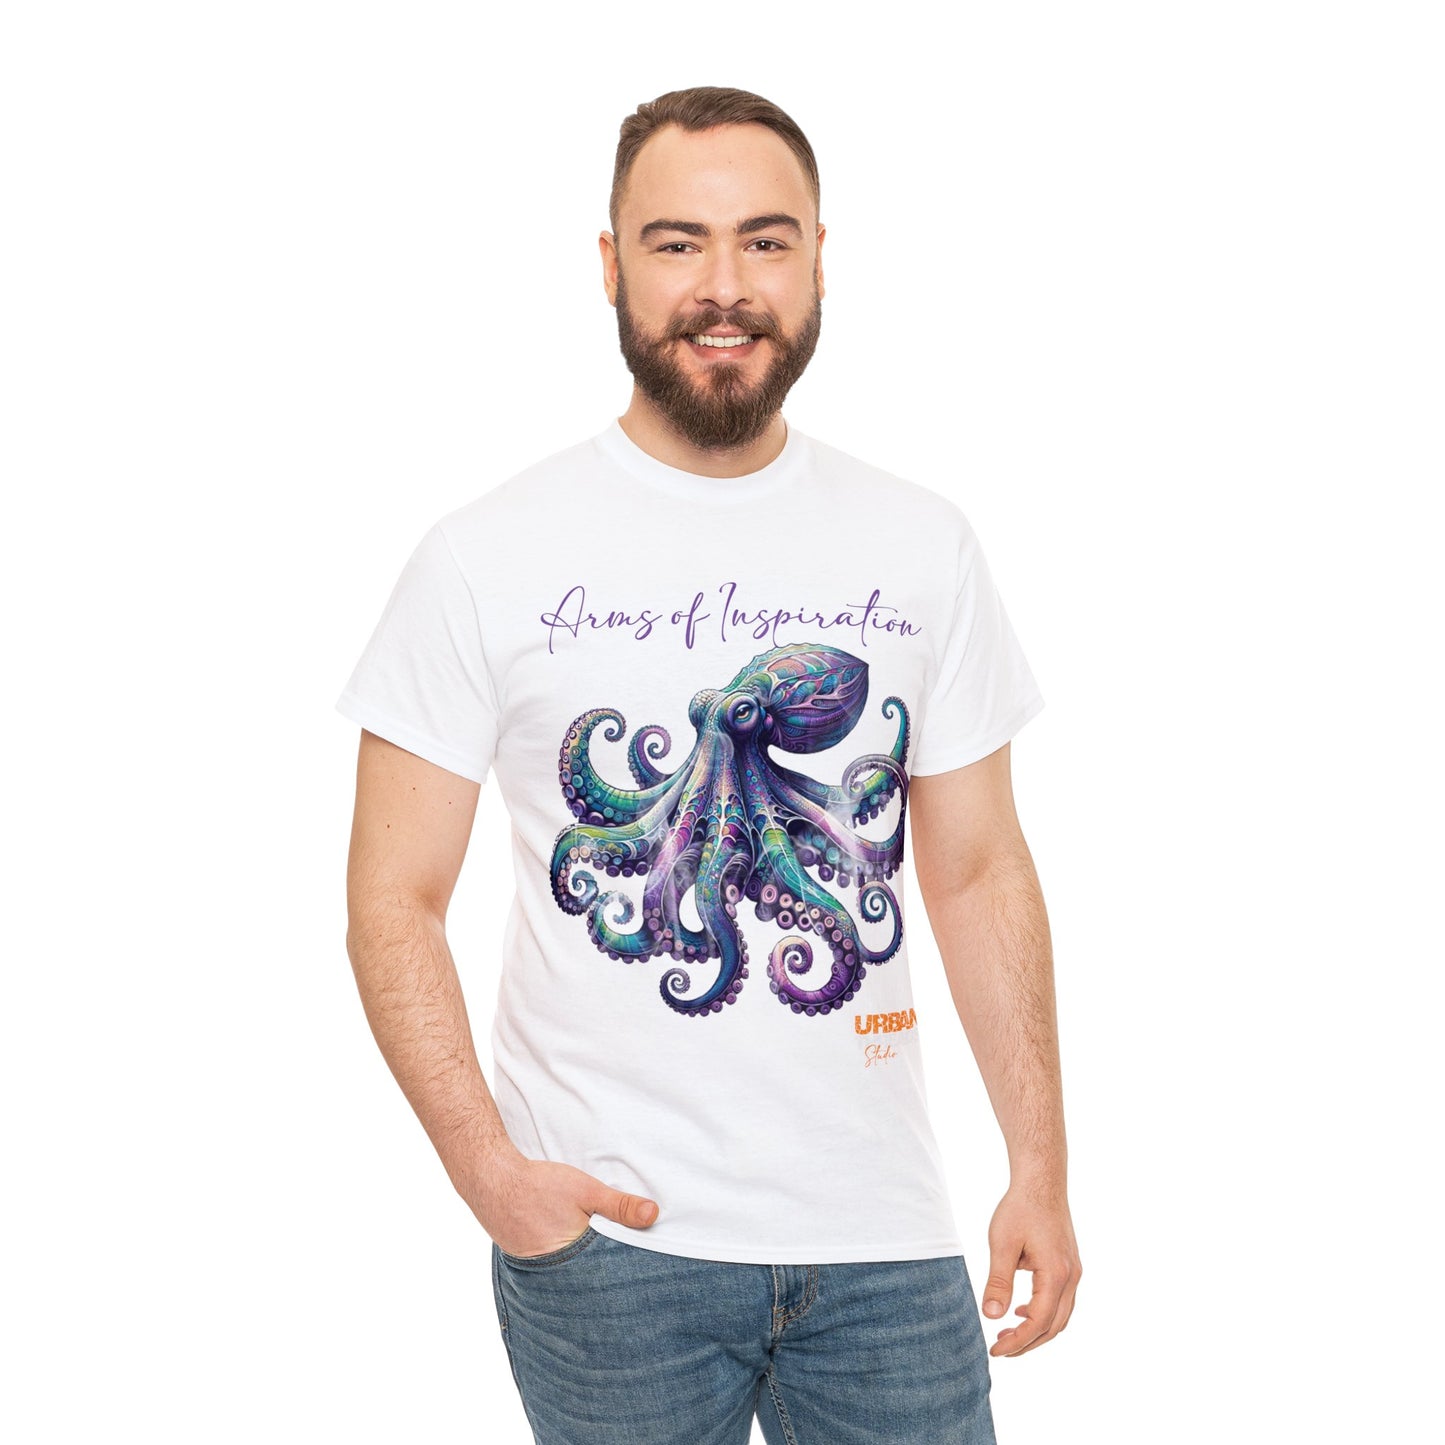 Arms of Inspiration Unisex Heavy Cotton Tee